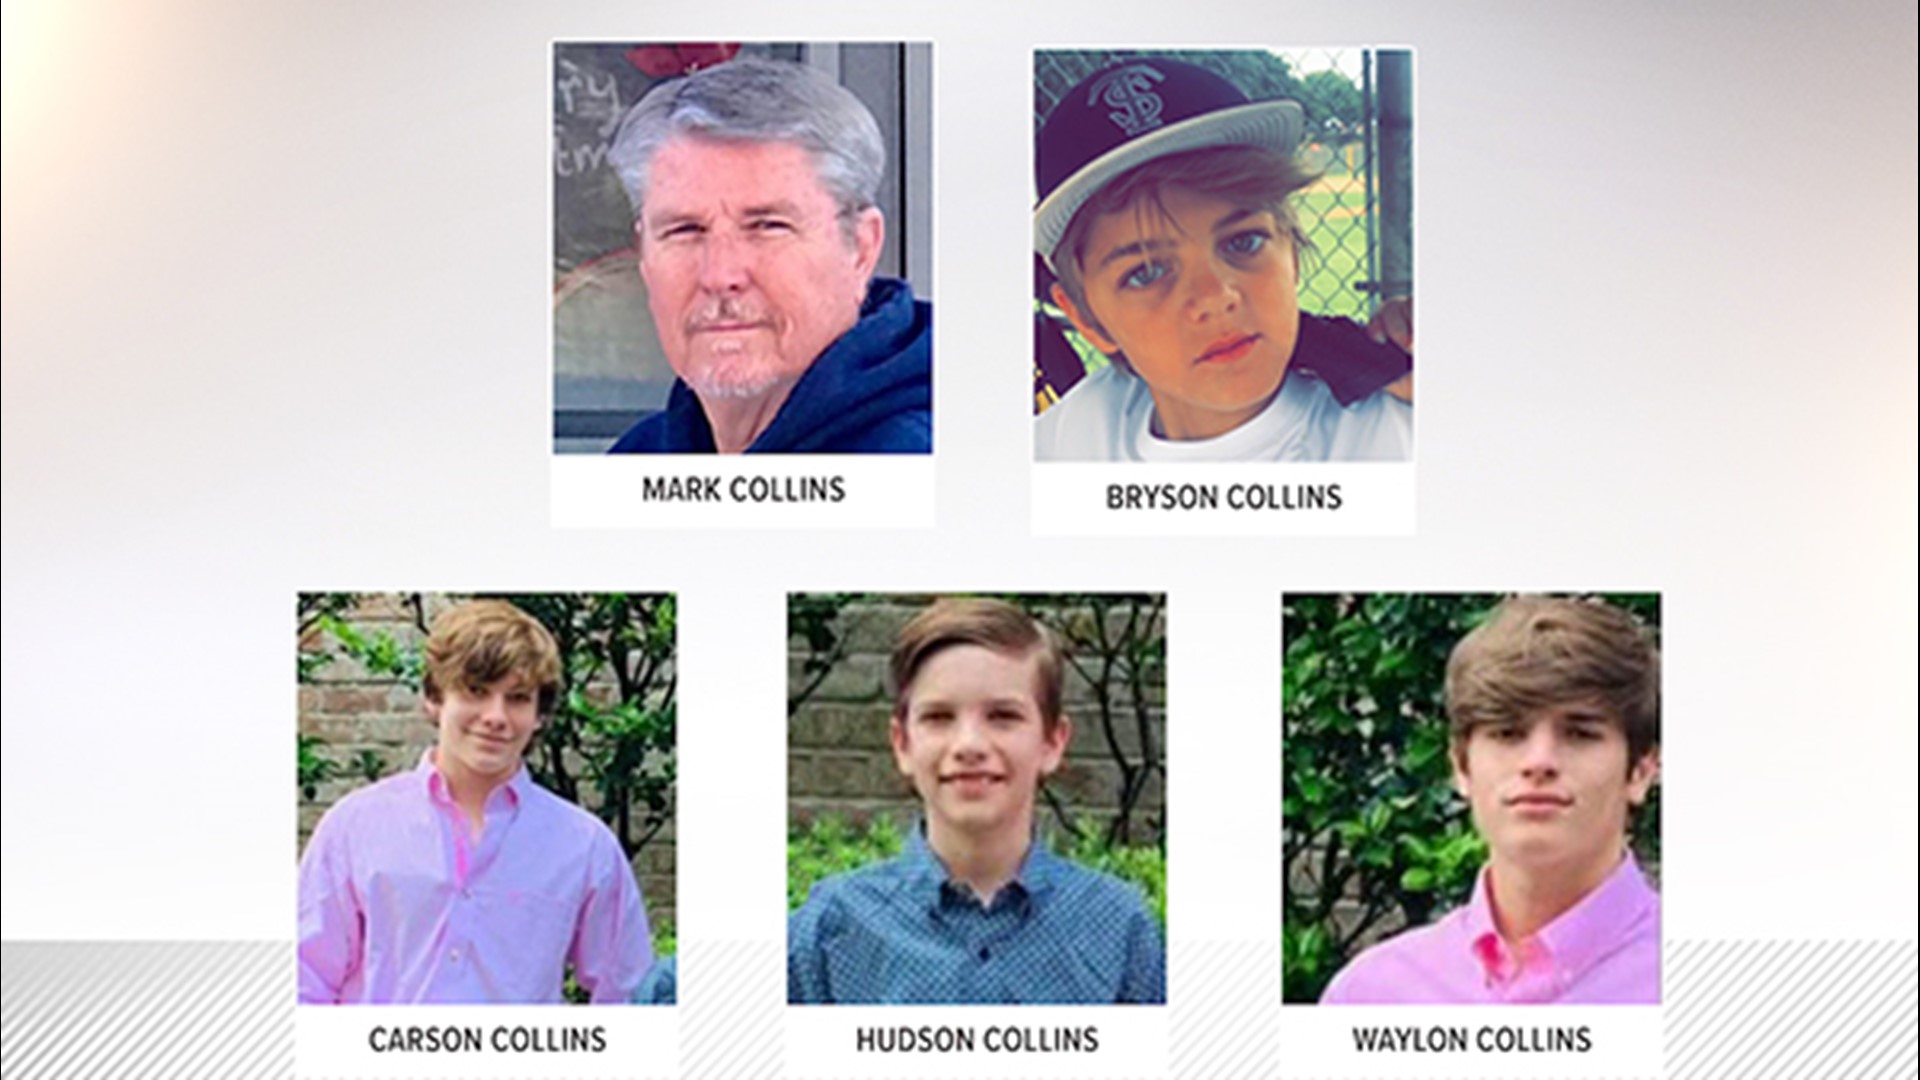 66-year-old Mark Collins and his four grandsons -- Brothers, 18-year-old Waylon, 16-year-old Carson and 11-year-old Hudson and cousin Bryson, 11, were killed.